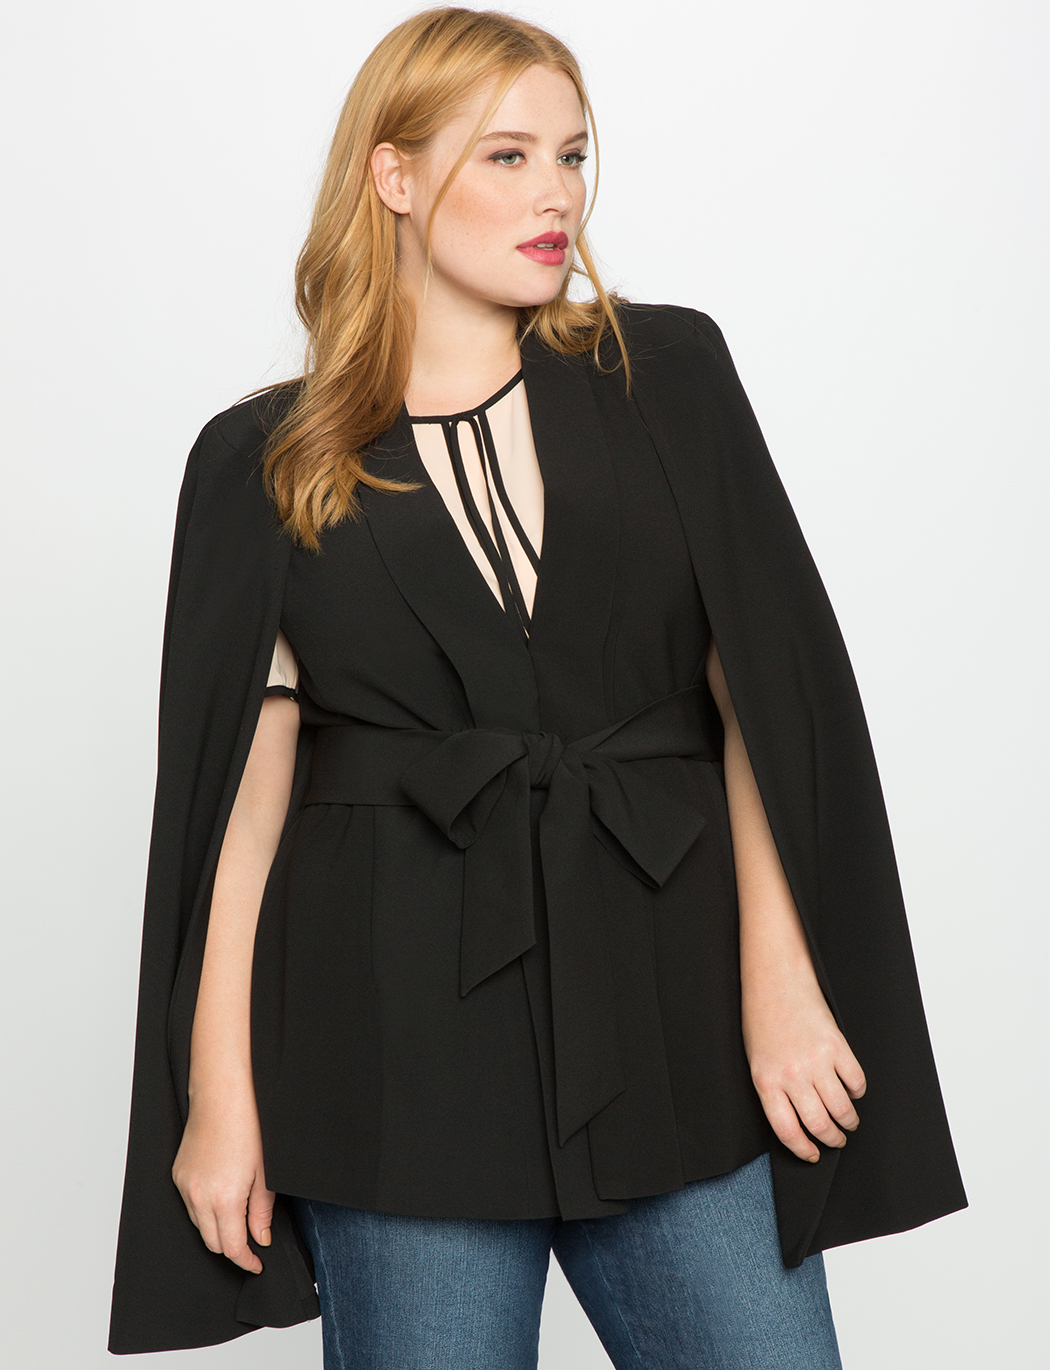 Eloquii Debuts Their Petite Plus Size Collection - Stylish Curves